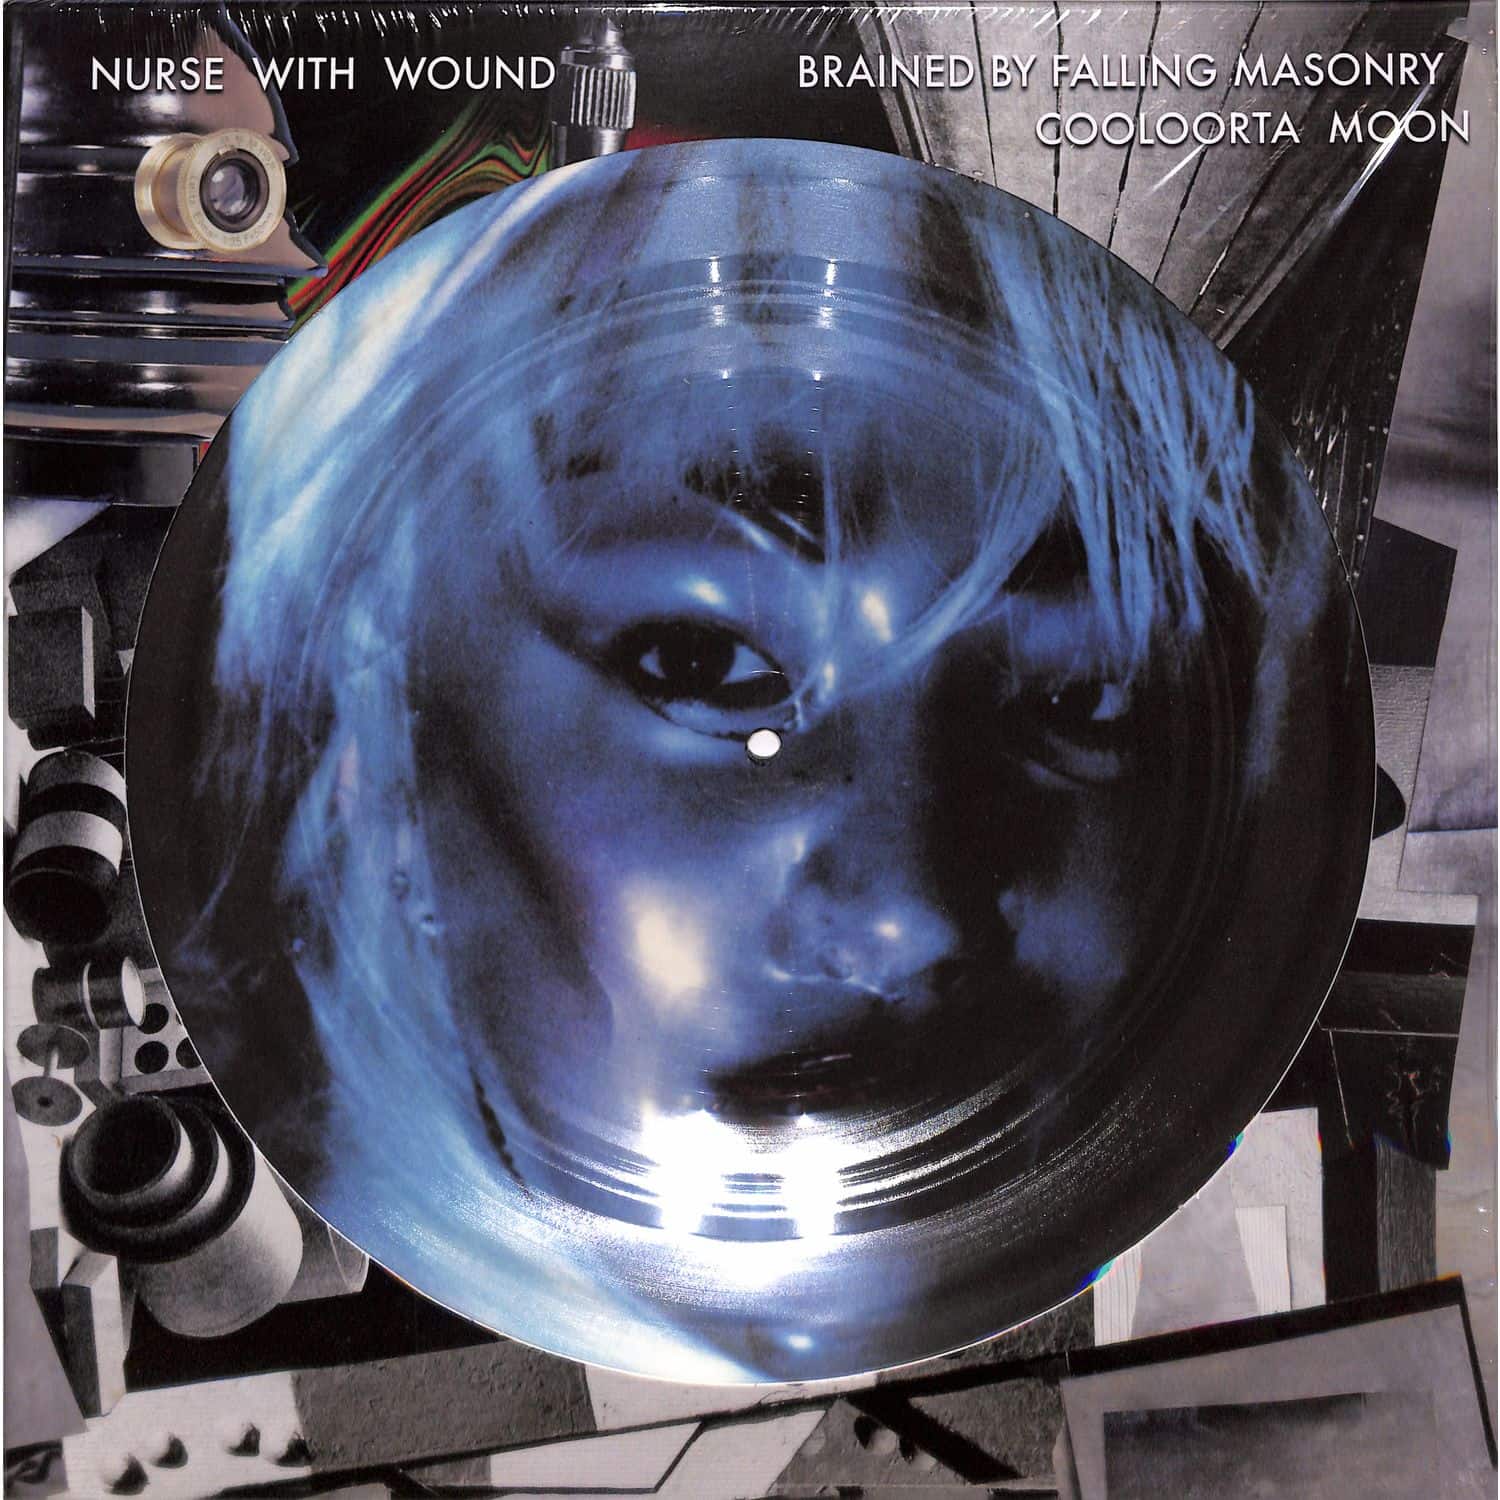 Nurse With Wound - BRAINED BY FALLEN MASONRY / COOLOORTA MOON 